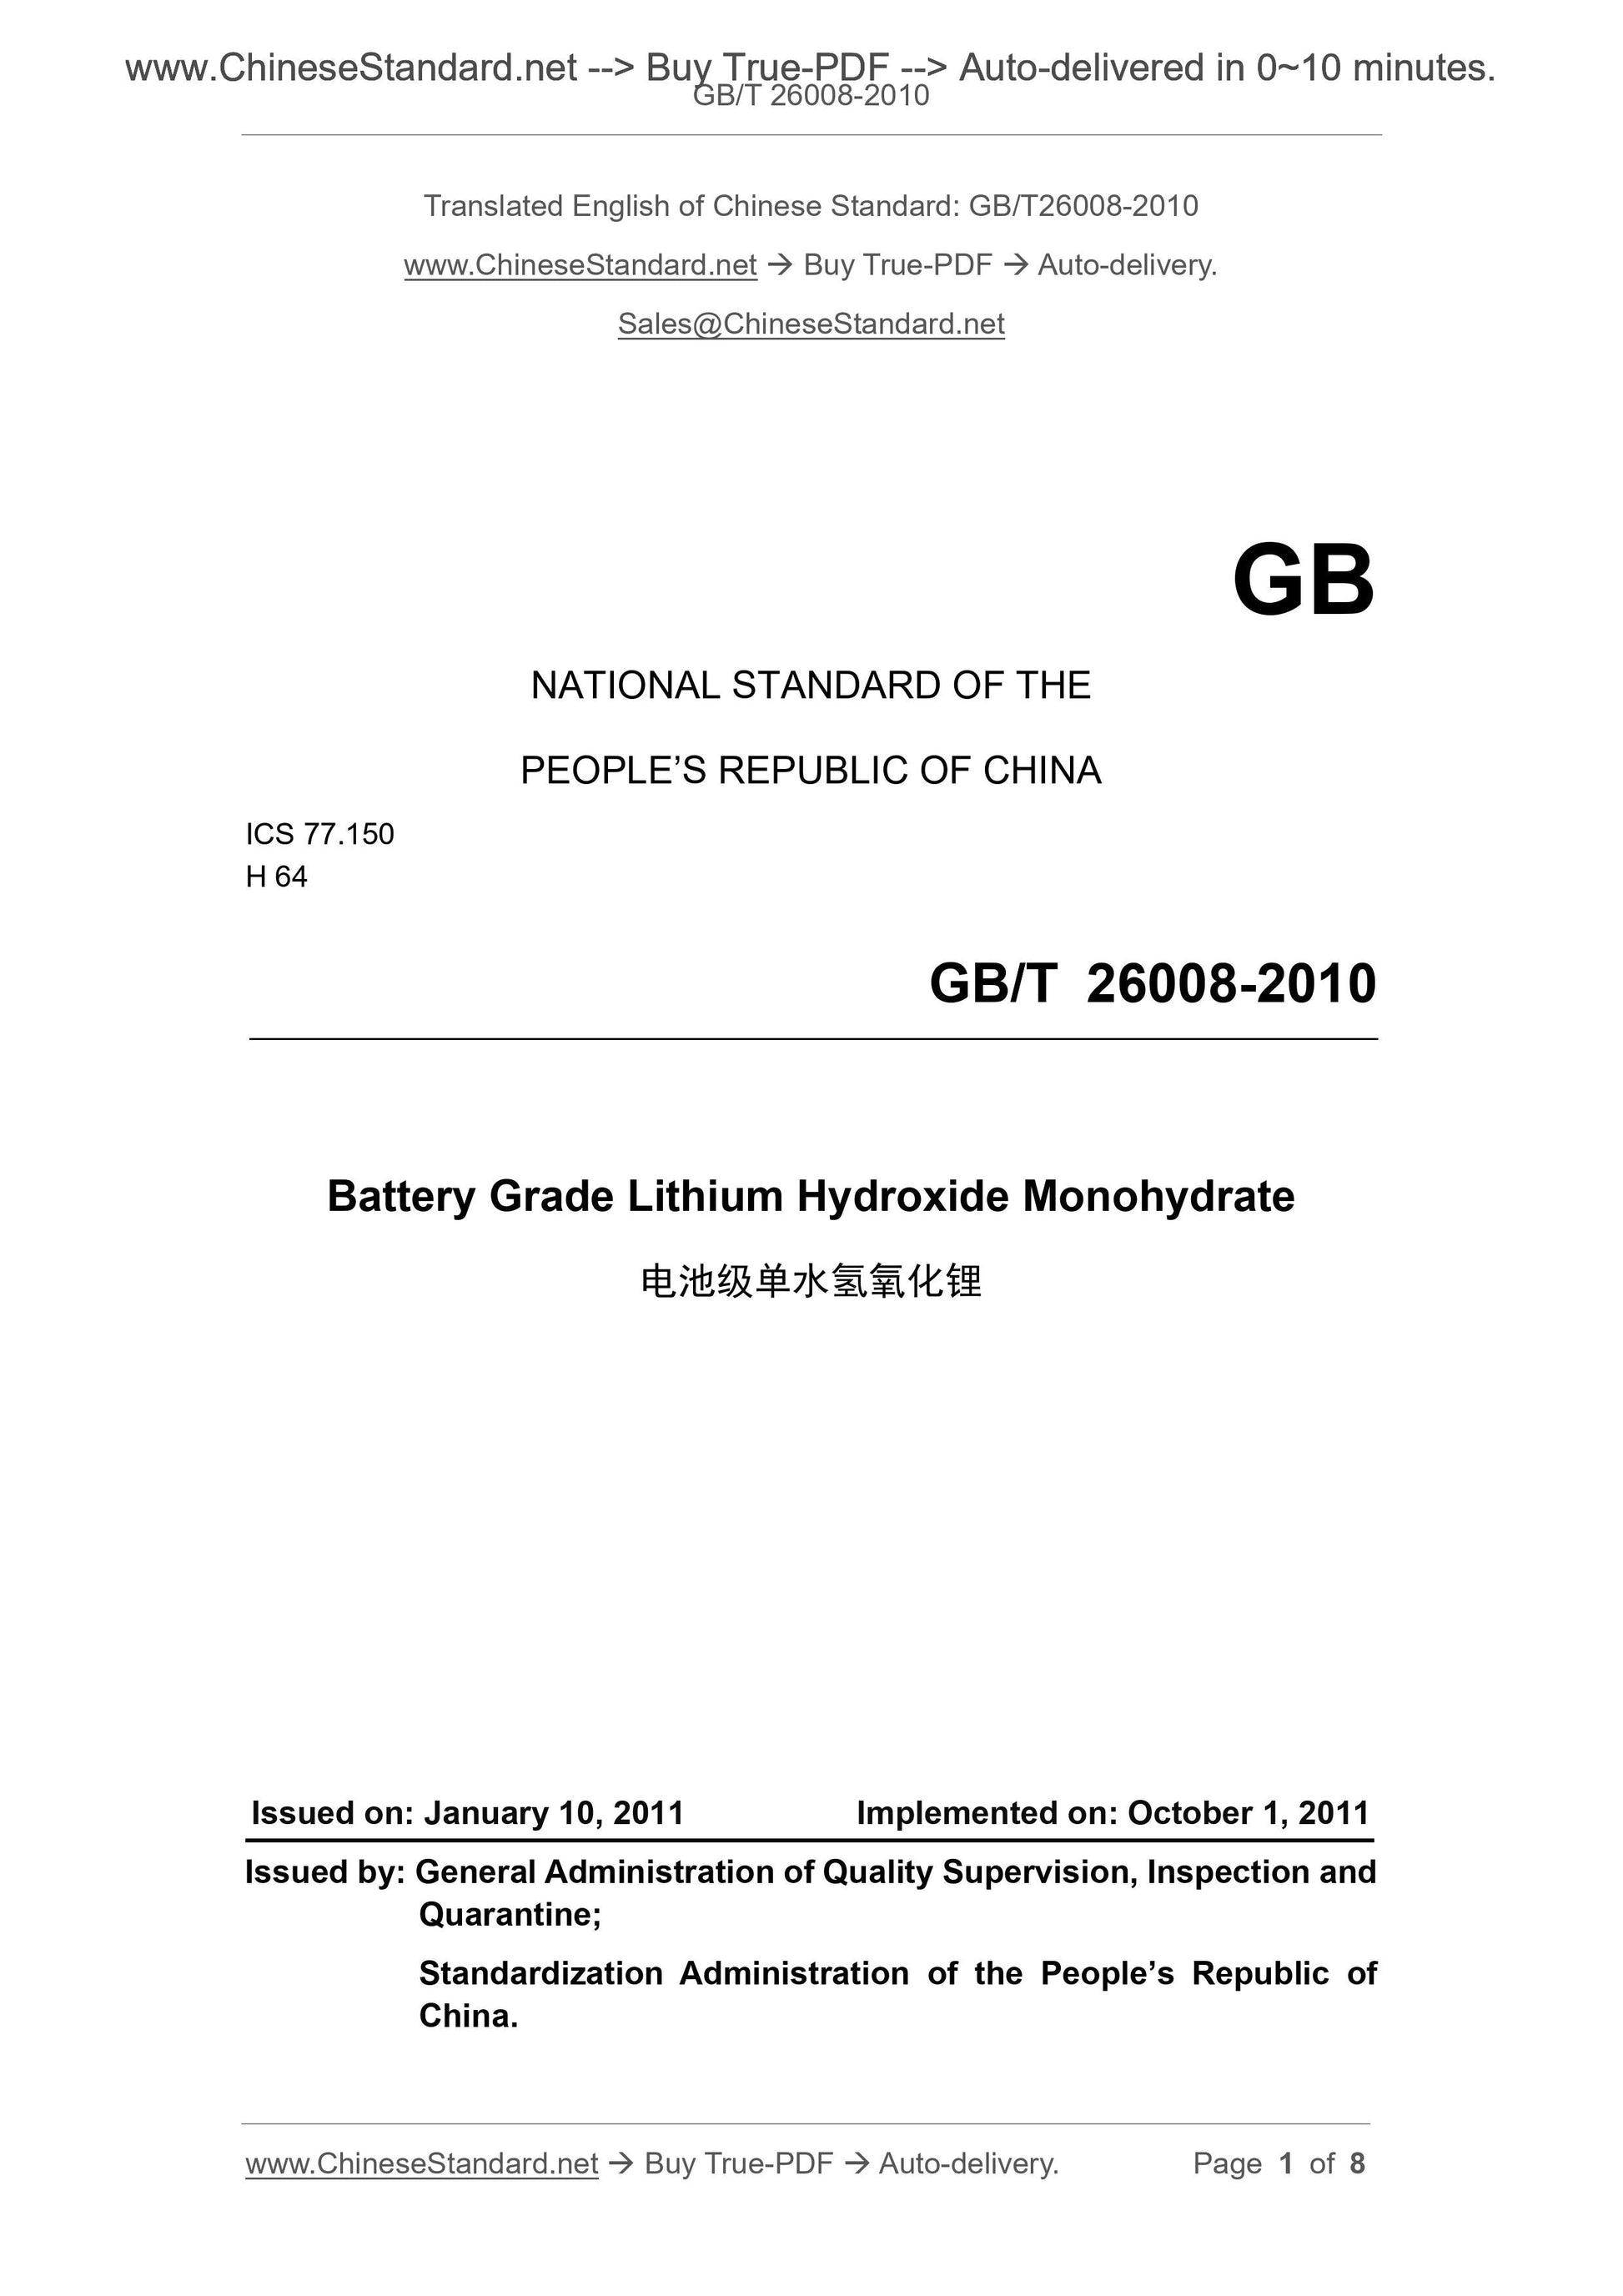 GB/T 26008-2010 Page 1